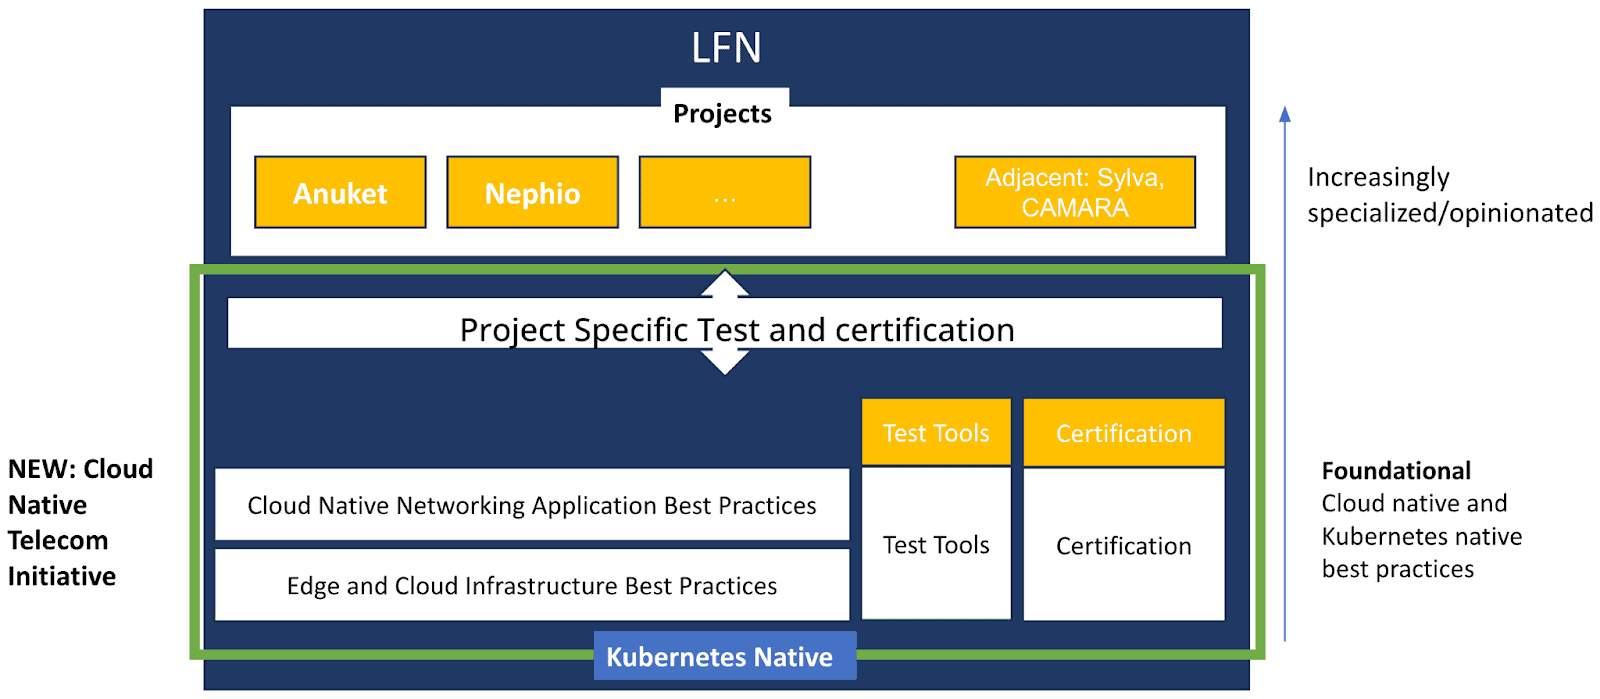 LFN Projects and Project Specific Test and certification